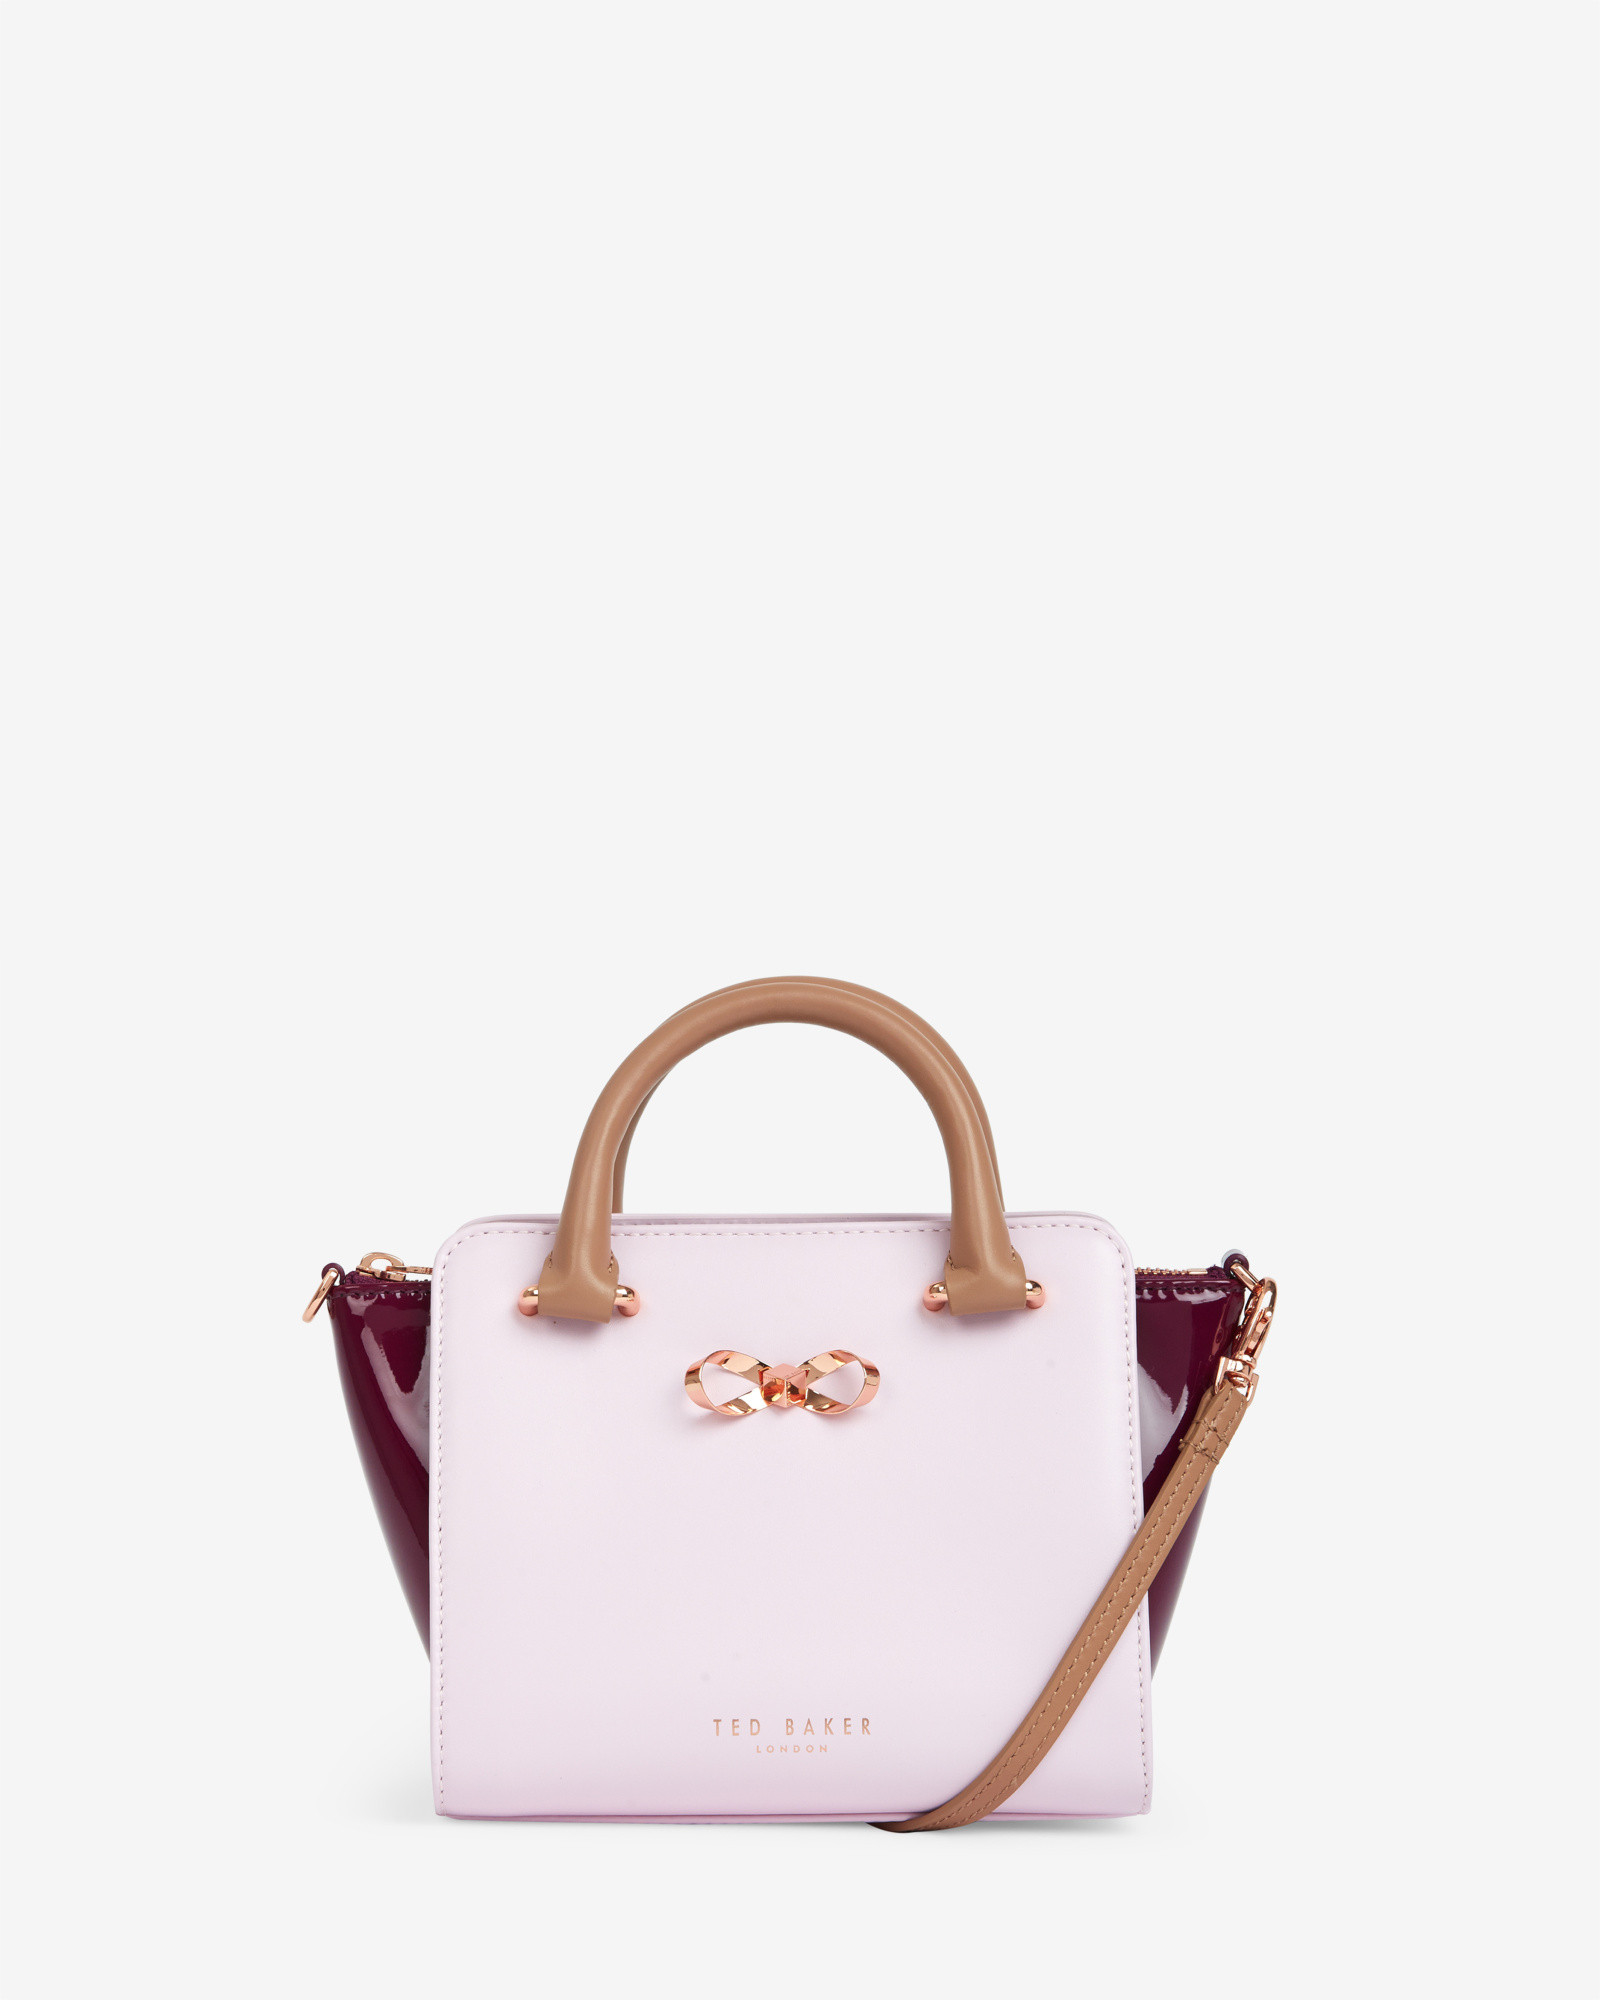 Ted baker Colour Block Leather Tote Bag in Pink (Pale Pink) | Lyst